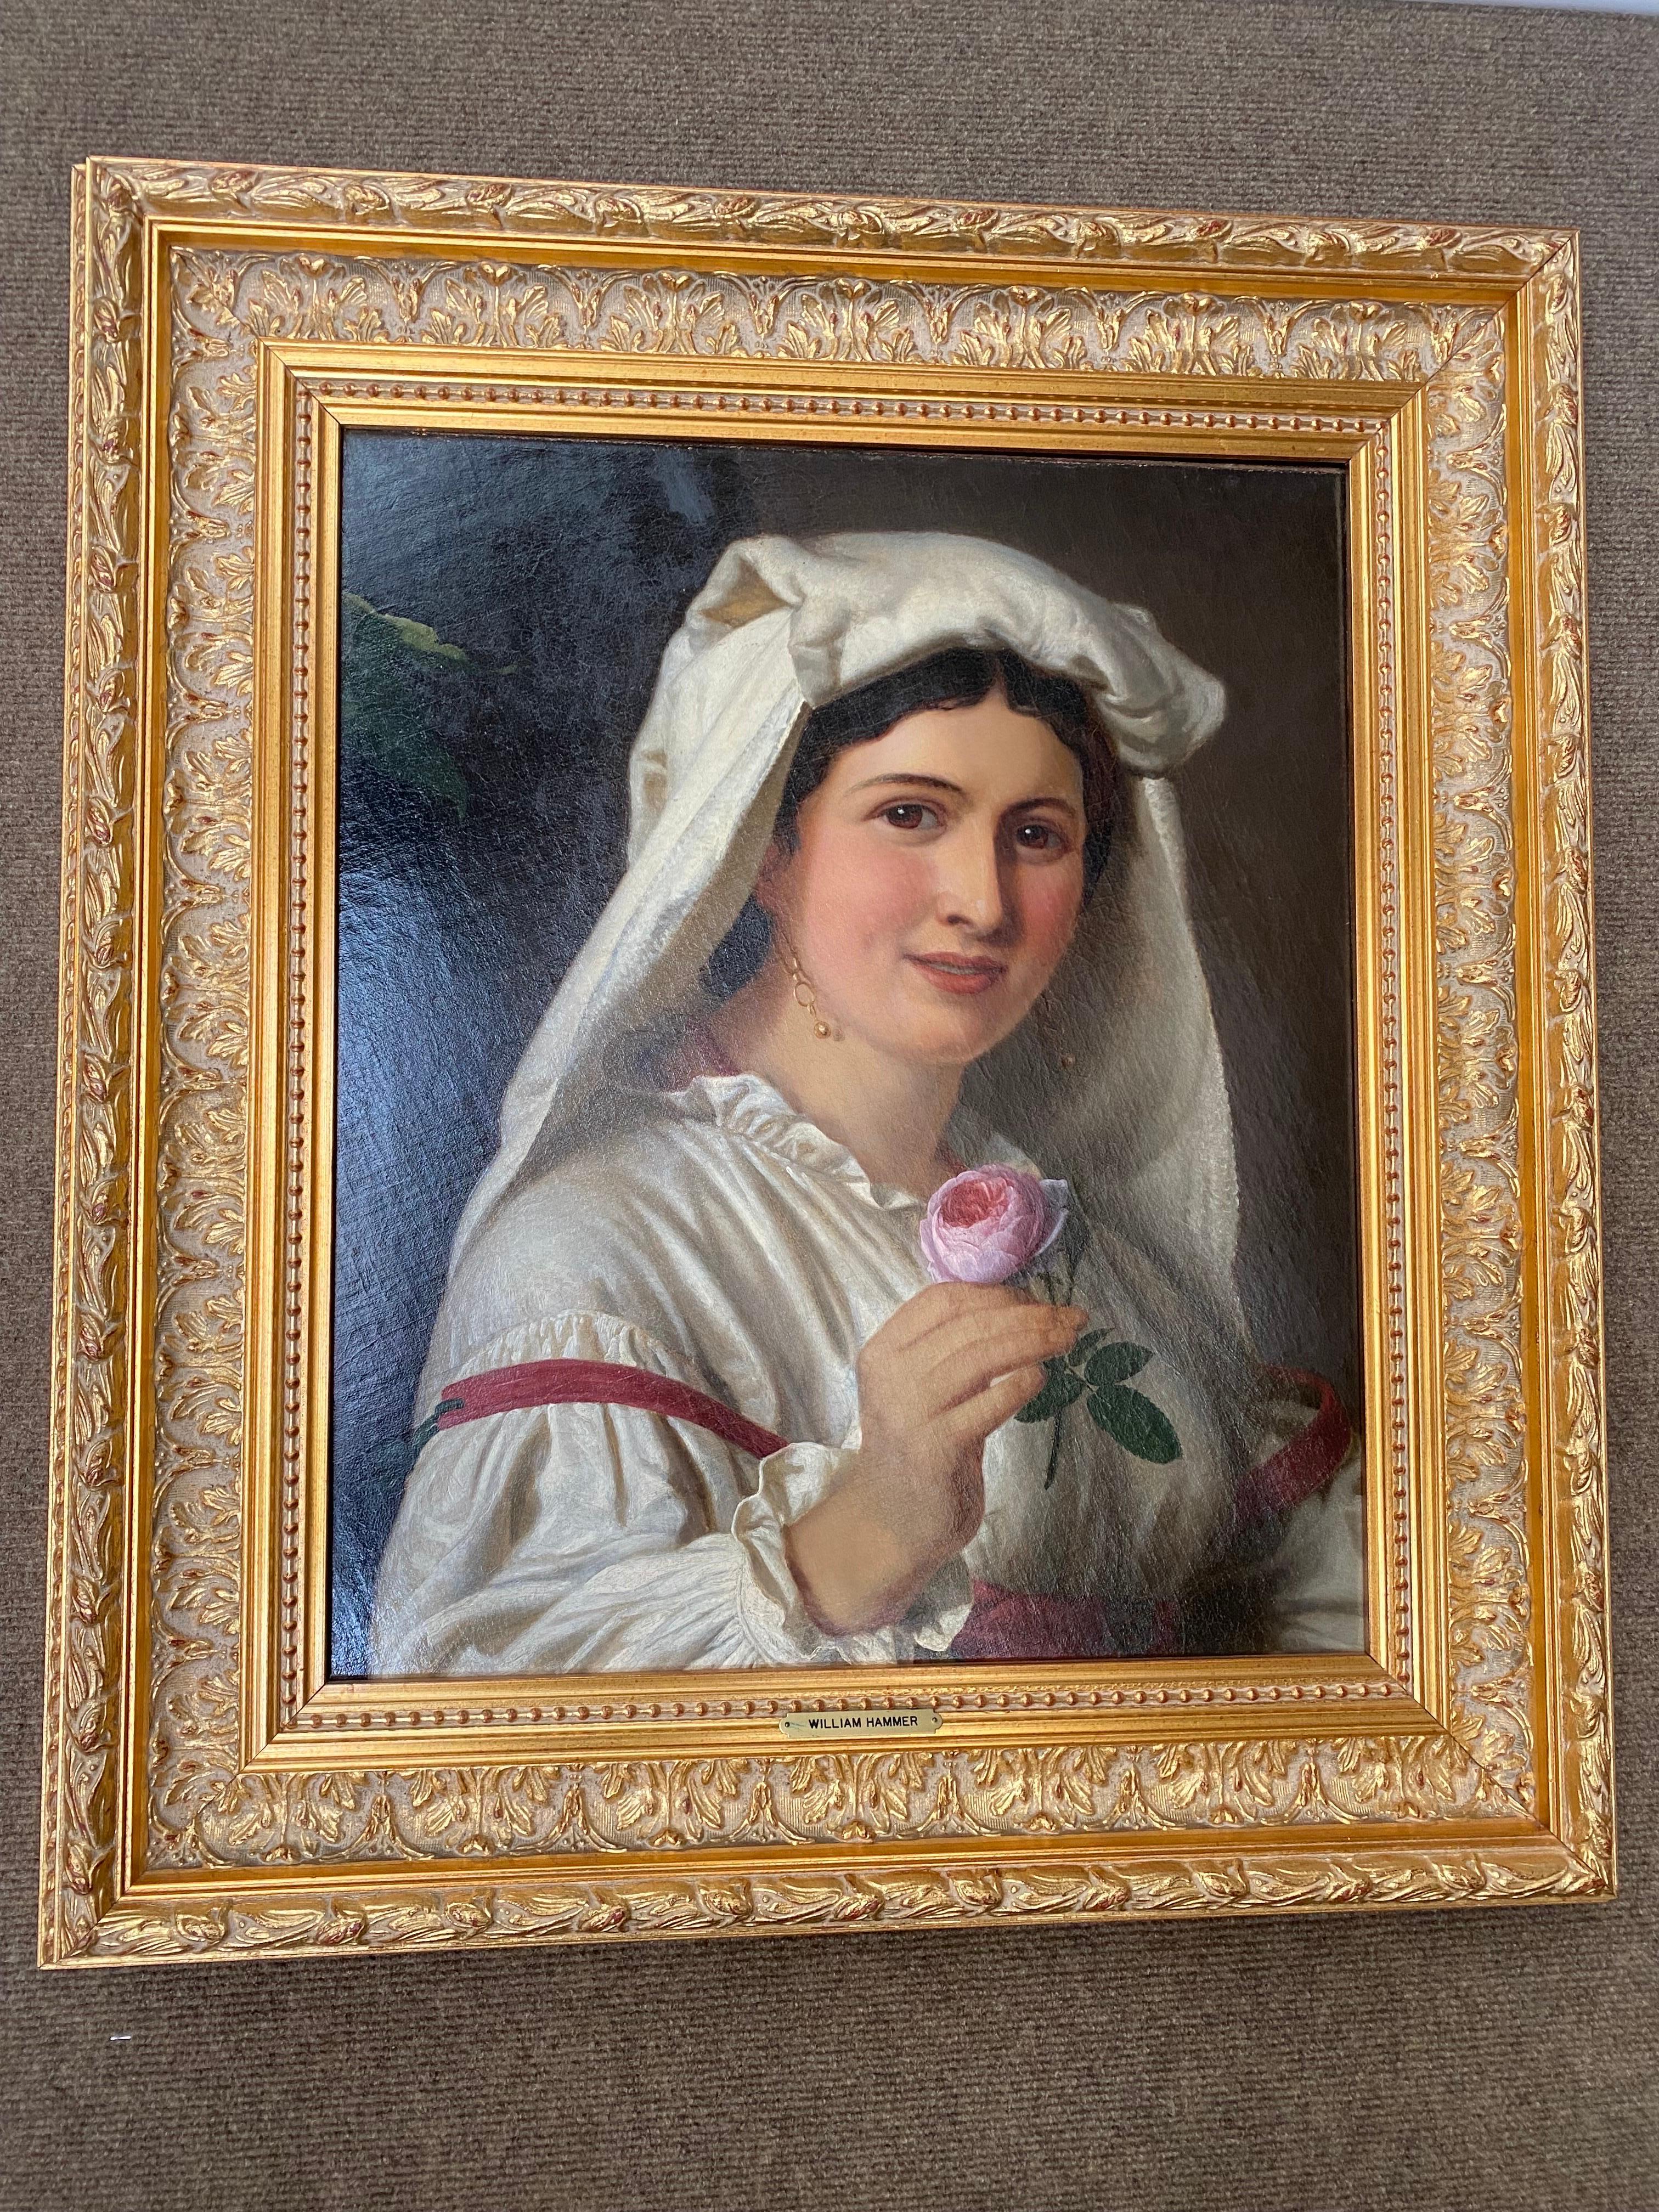 Antique English Oil/Canvas of a Young Girl holding a Rose after William Hammer, within a gilt frame, ready to be hung.